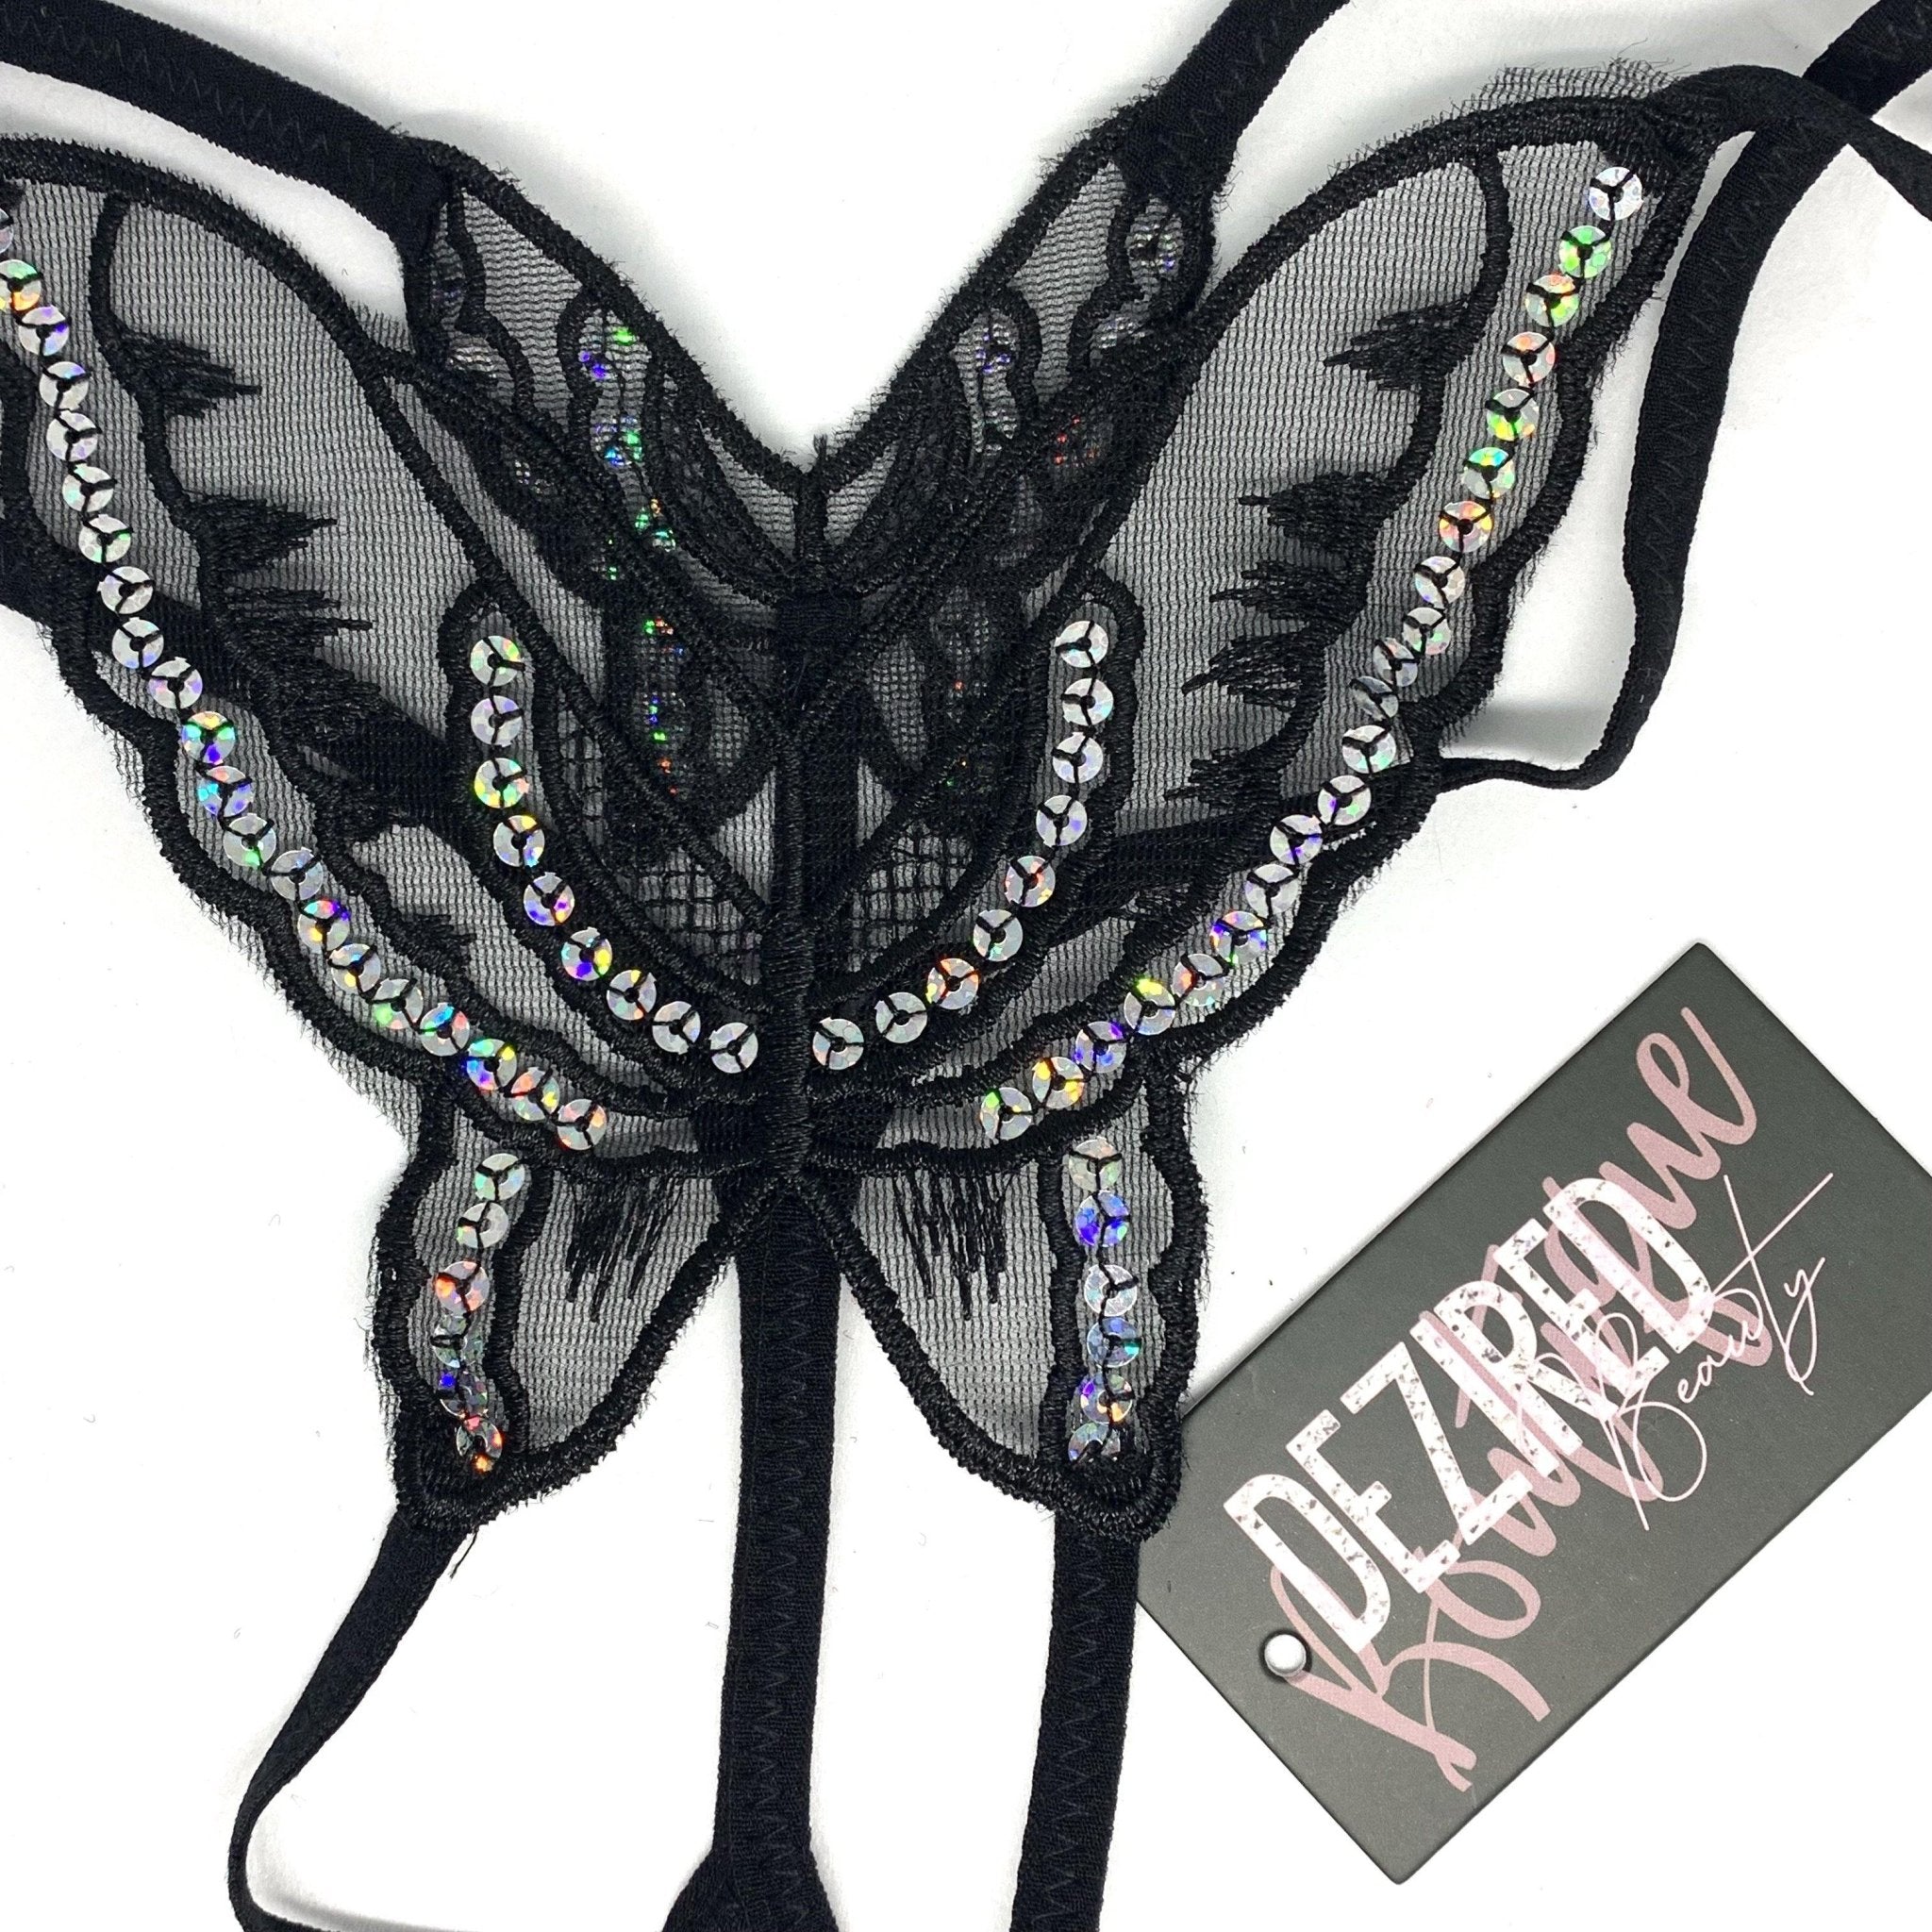 Butterfly Panties